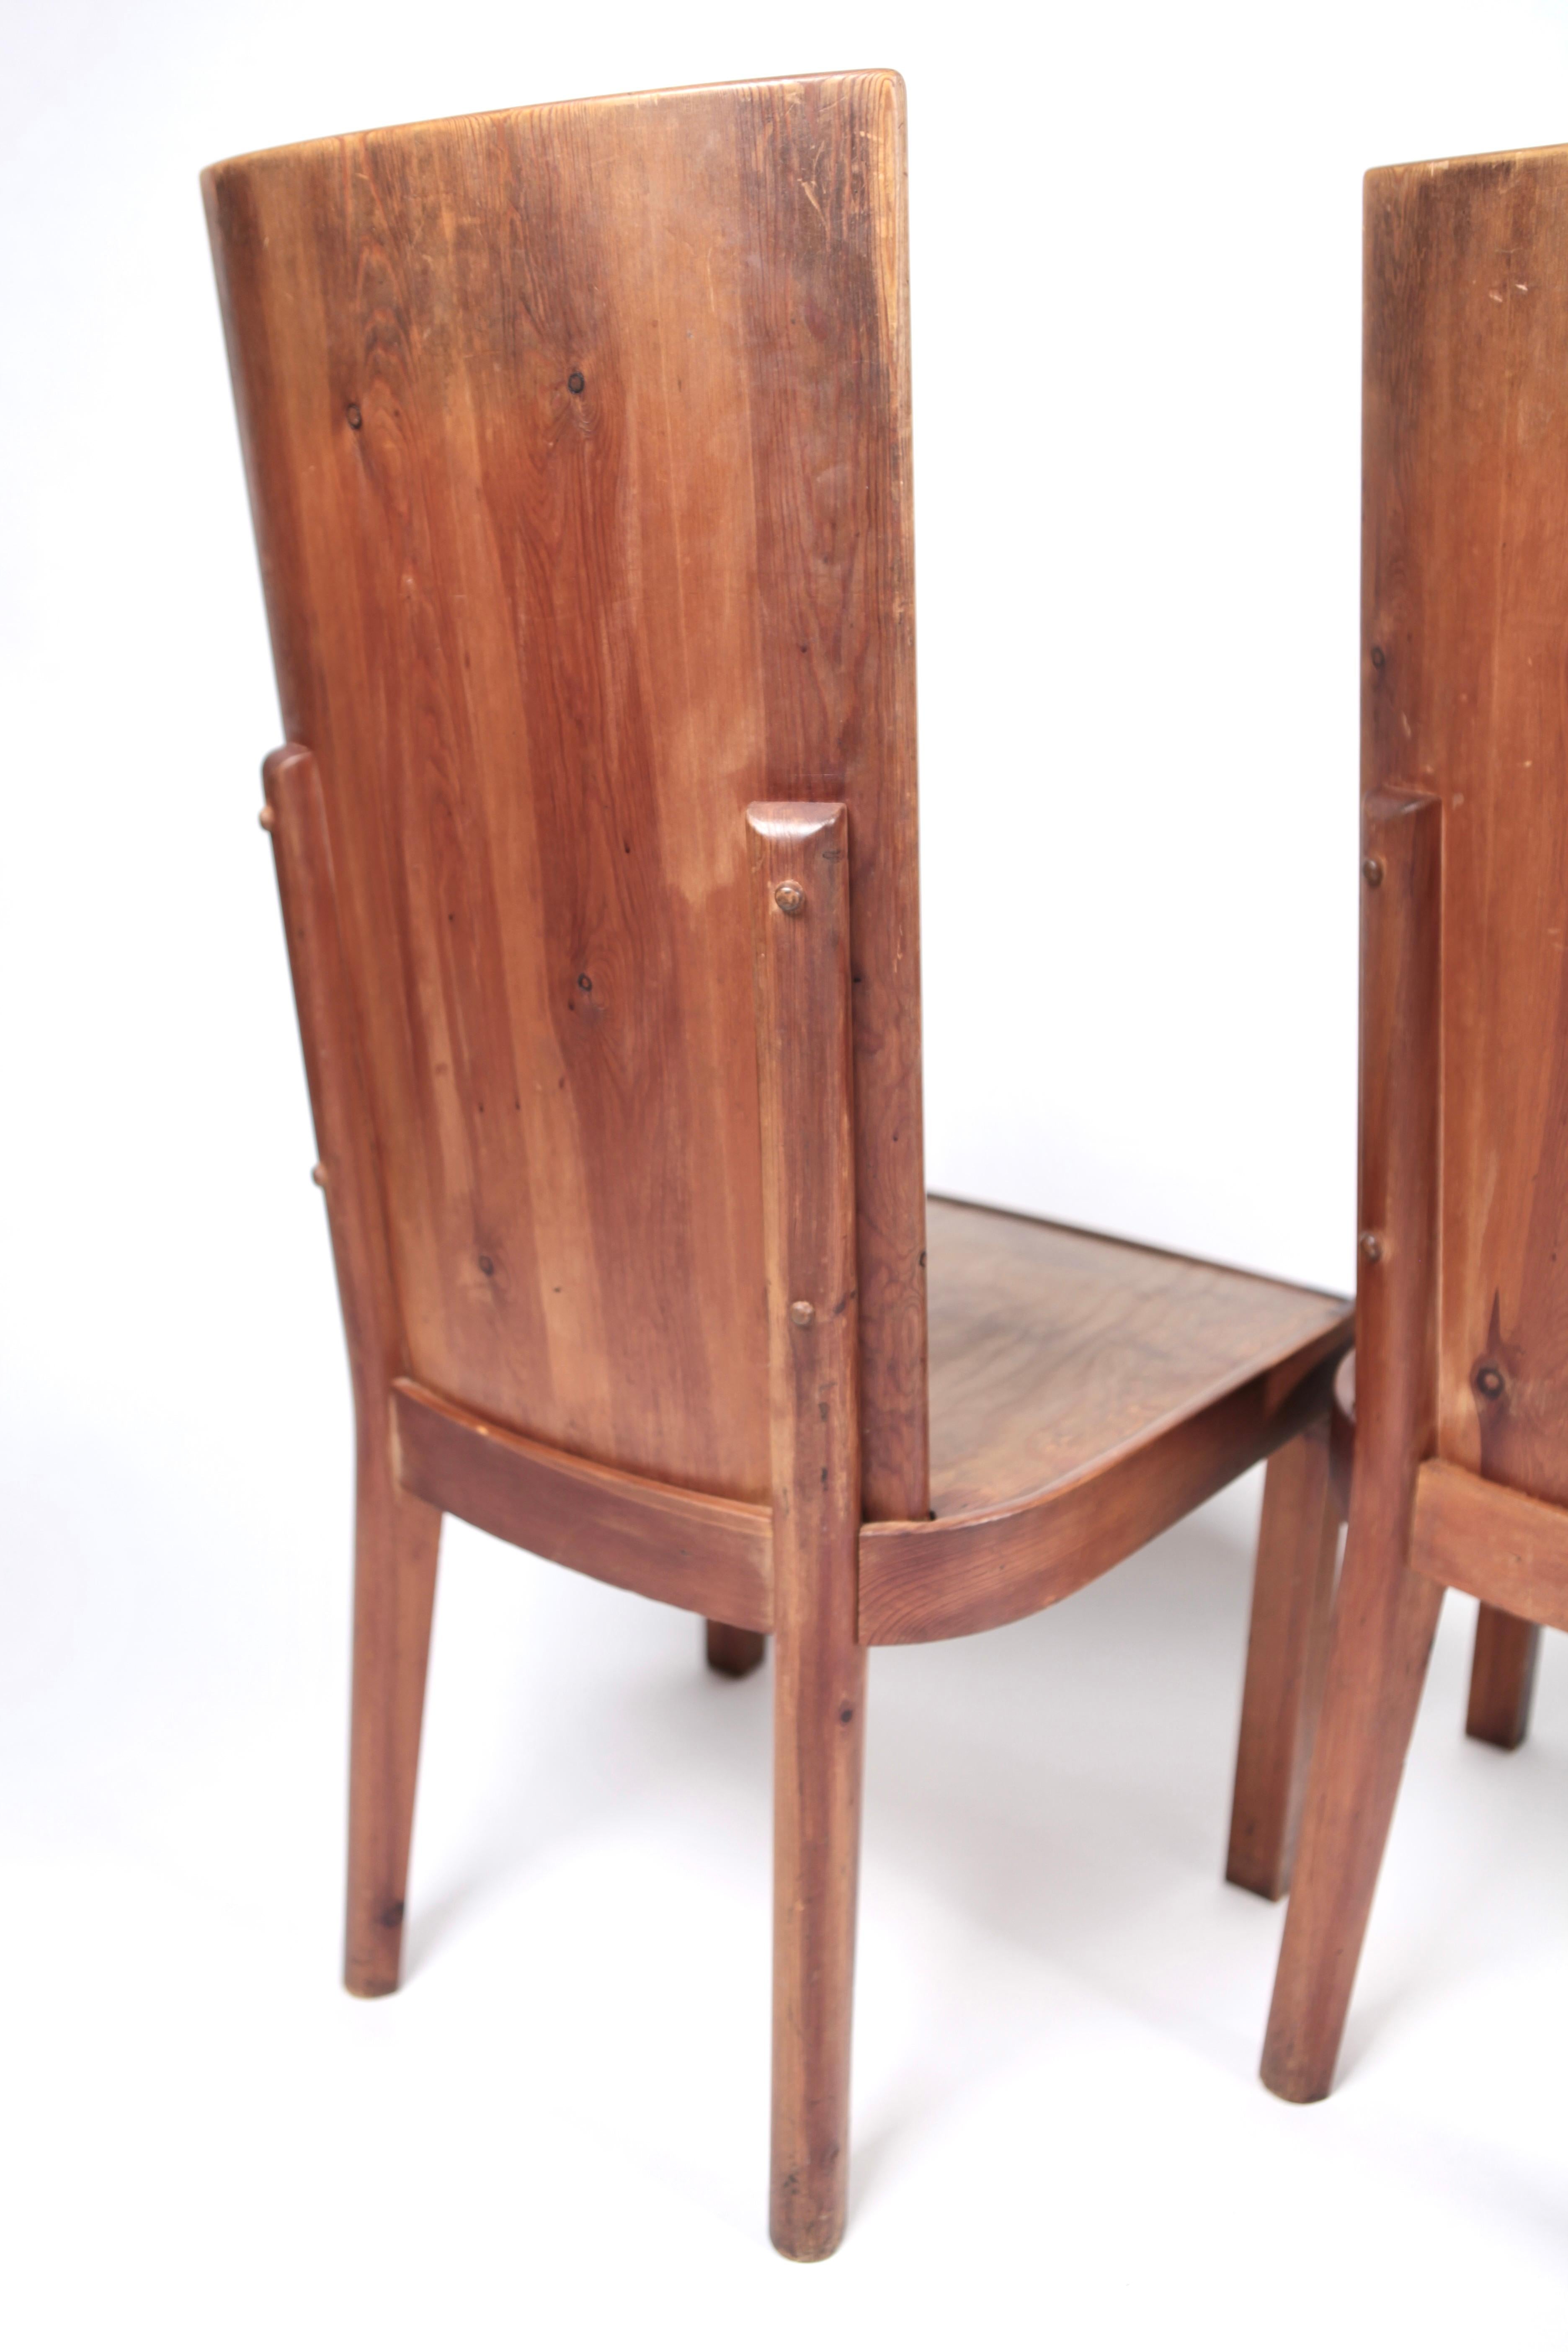 Set of 4 High Back Stained Pine Chairs, Attributed to Axel Einar Hjorth, Sweden  For Sale 4